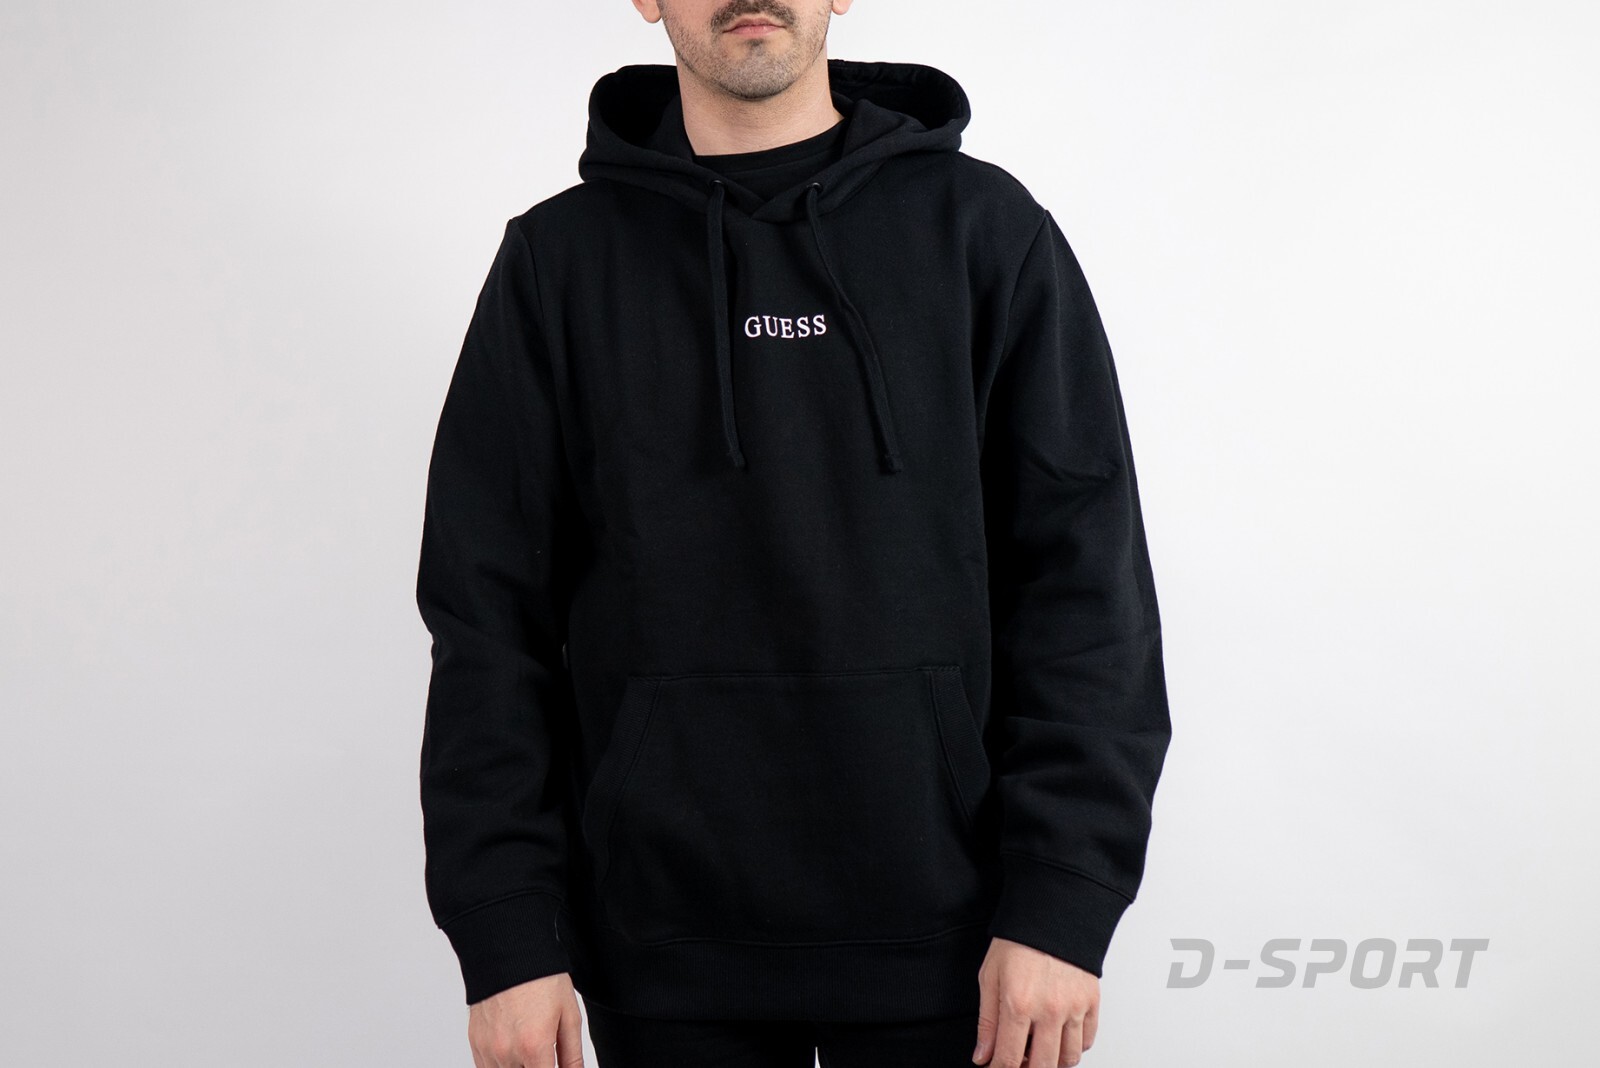 GUESS ROY ESS GUESS HOODIE